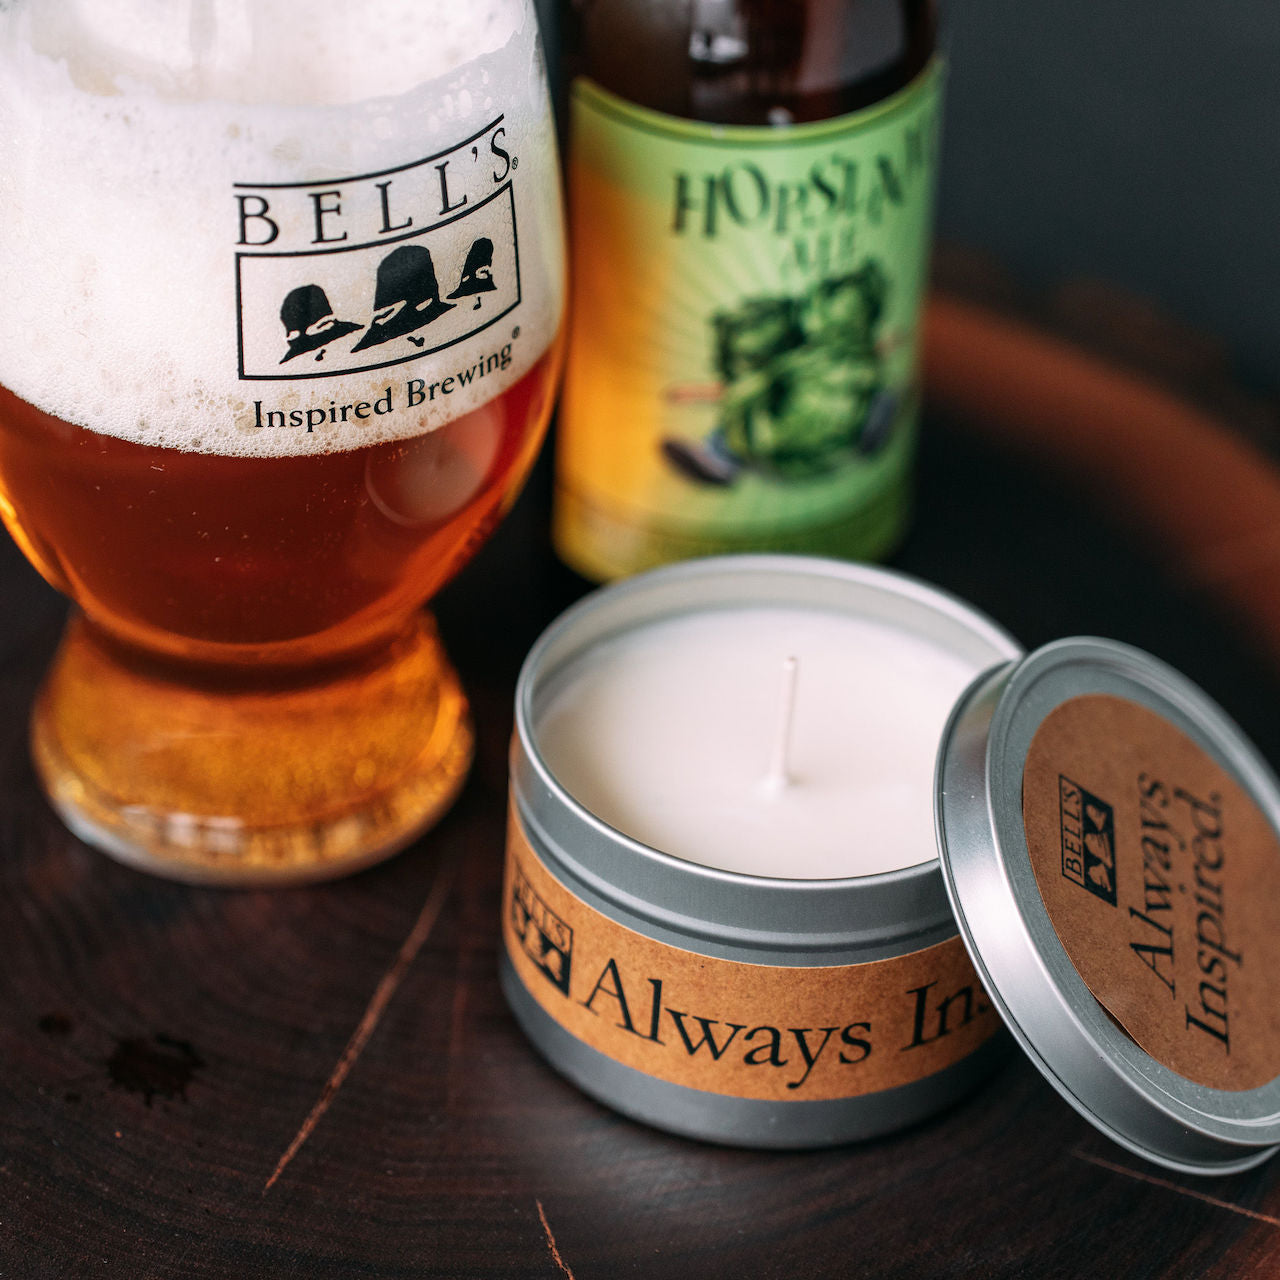 Custom Label Candle with Bell's Beer - Kalamazoo Candle Company